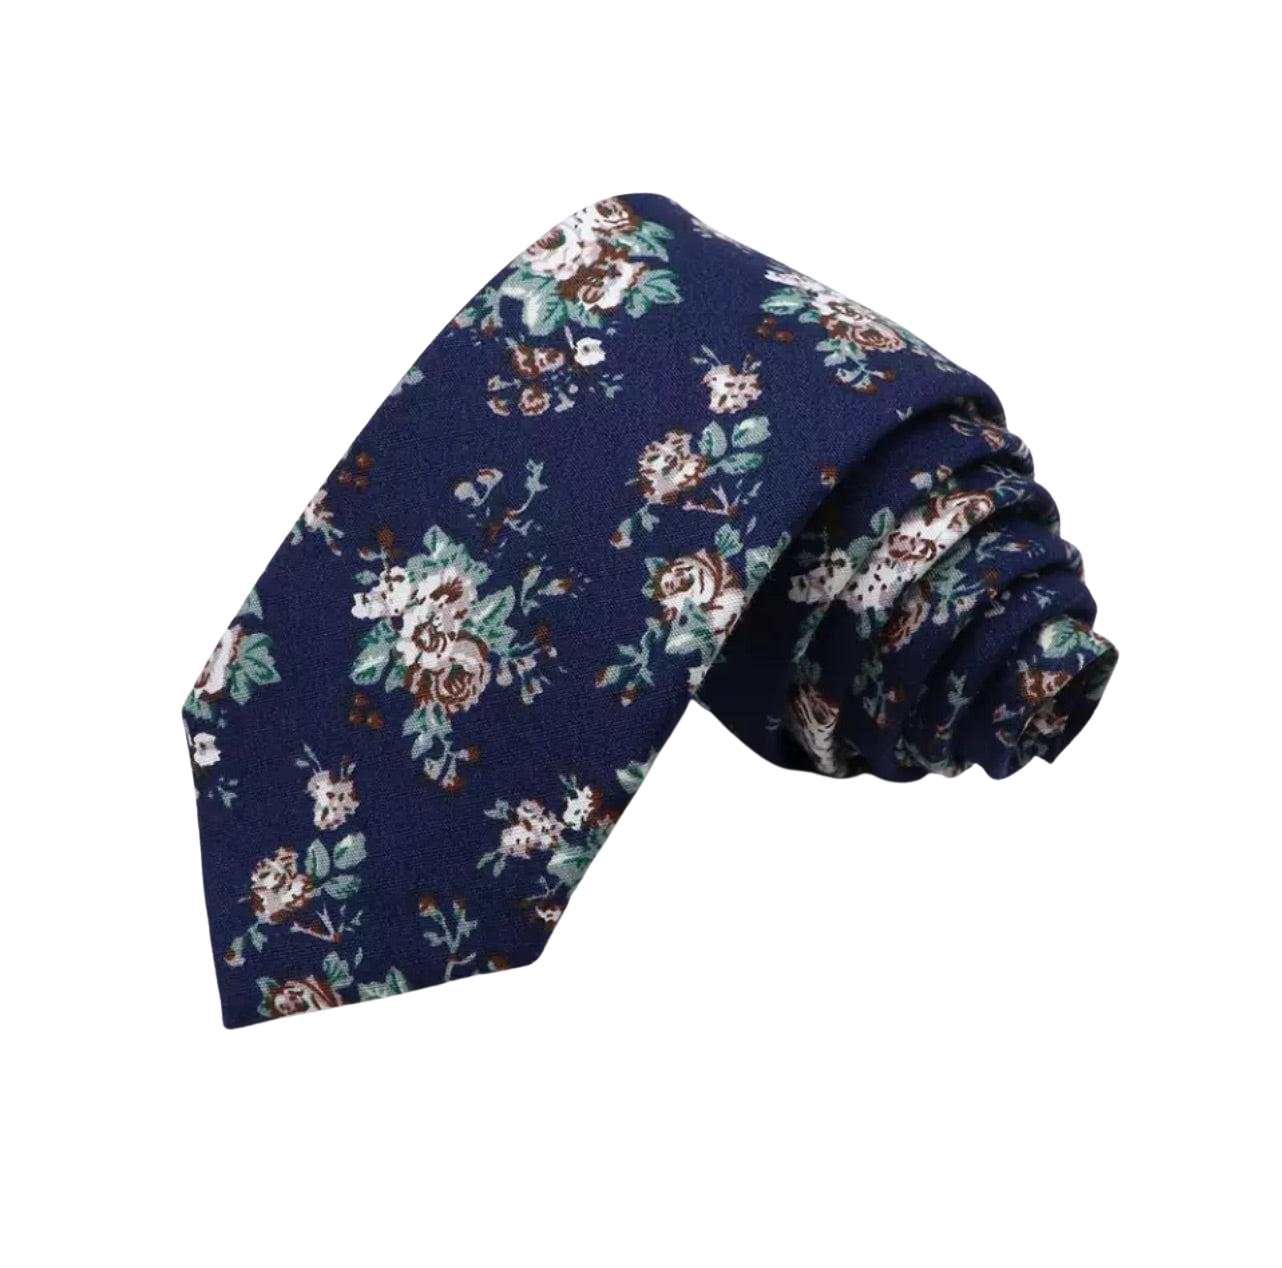 NAVY Floral Tie 2.36&quot; LAKE - MYTIESHOP-Neckties-Navy Floral Skinny Tie Men’s Floral Necktie for weddings events, great for prom anniversary gifts. Groom groomsmen father of bride blue floral tie-Mytieshop. Skinny ties for weddings anniversaries. Father of bride. Groomsmen. Cool skinny neckties for men. Neckwear for prom, missions and fancy events. Gift ideas for men. Anniversaries ideas. Wedding aesthetics. Flower ties. Dry flower ties.